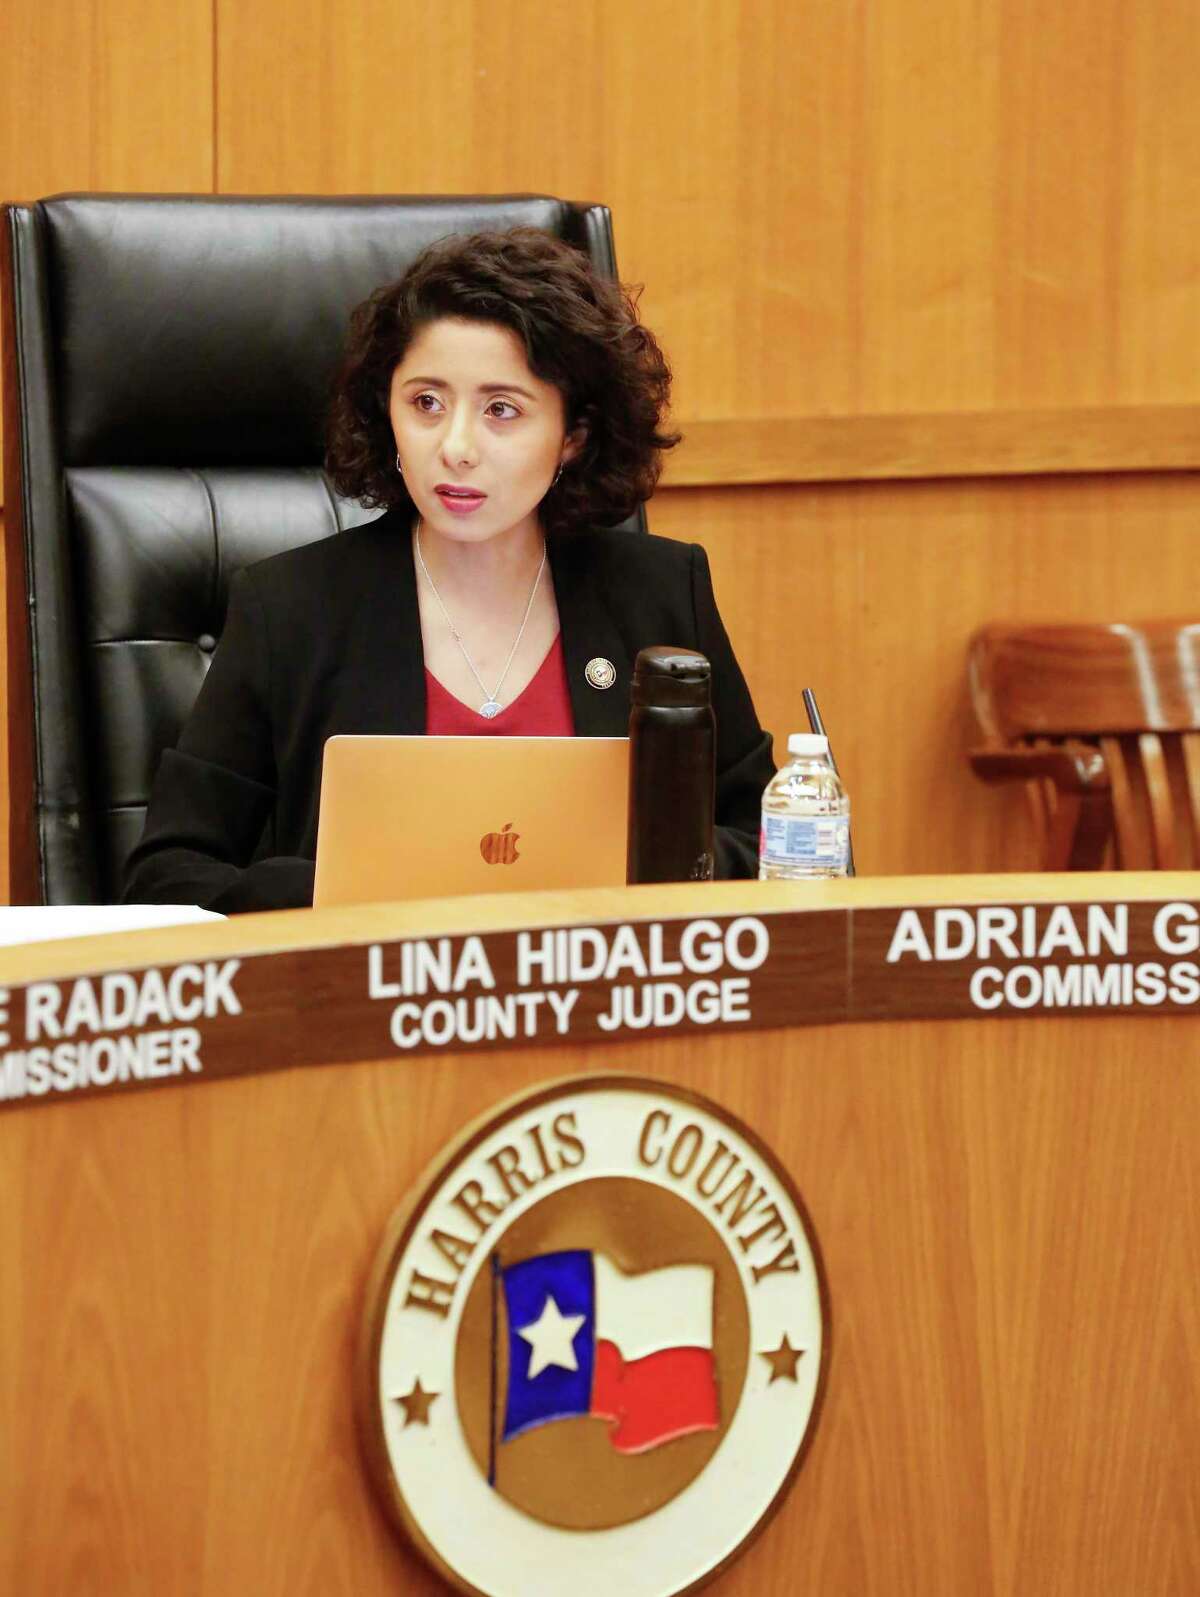 Harris County Judge Lina Hidalgo leads a emergency meeting due to the Coronavirus (COVID-19) outbreak Tuesday, March 17, 2020, in Houston. Only 10 people were allowed in the Harris County Commissioner Court.